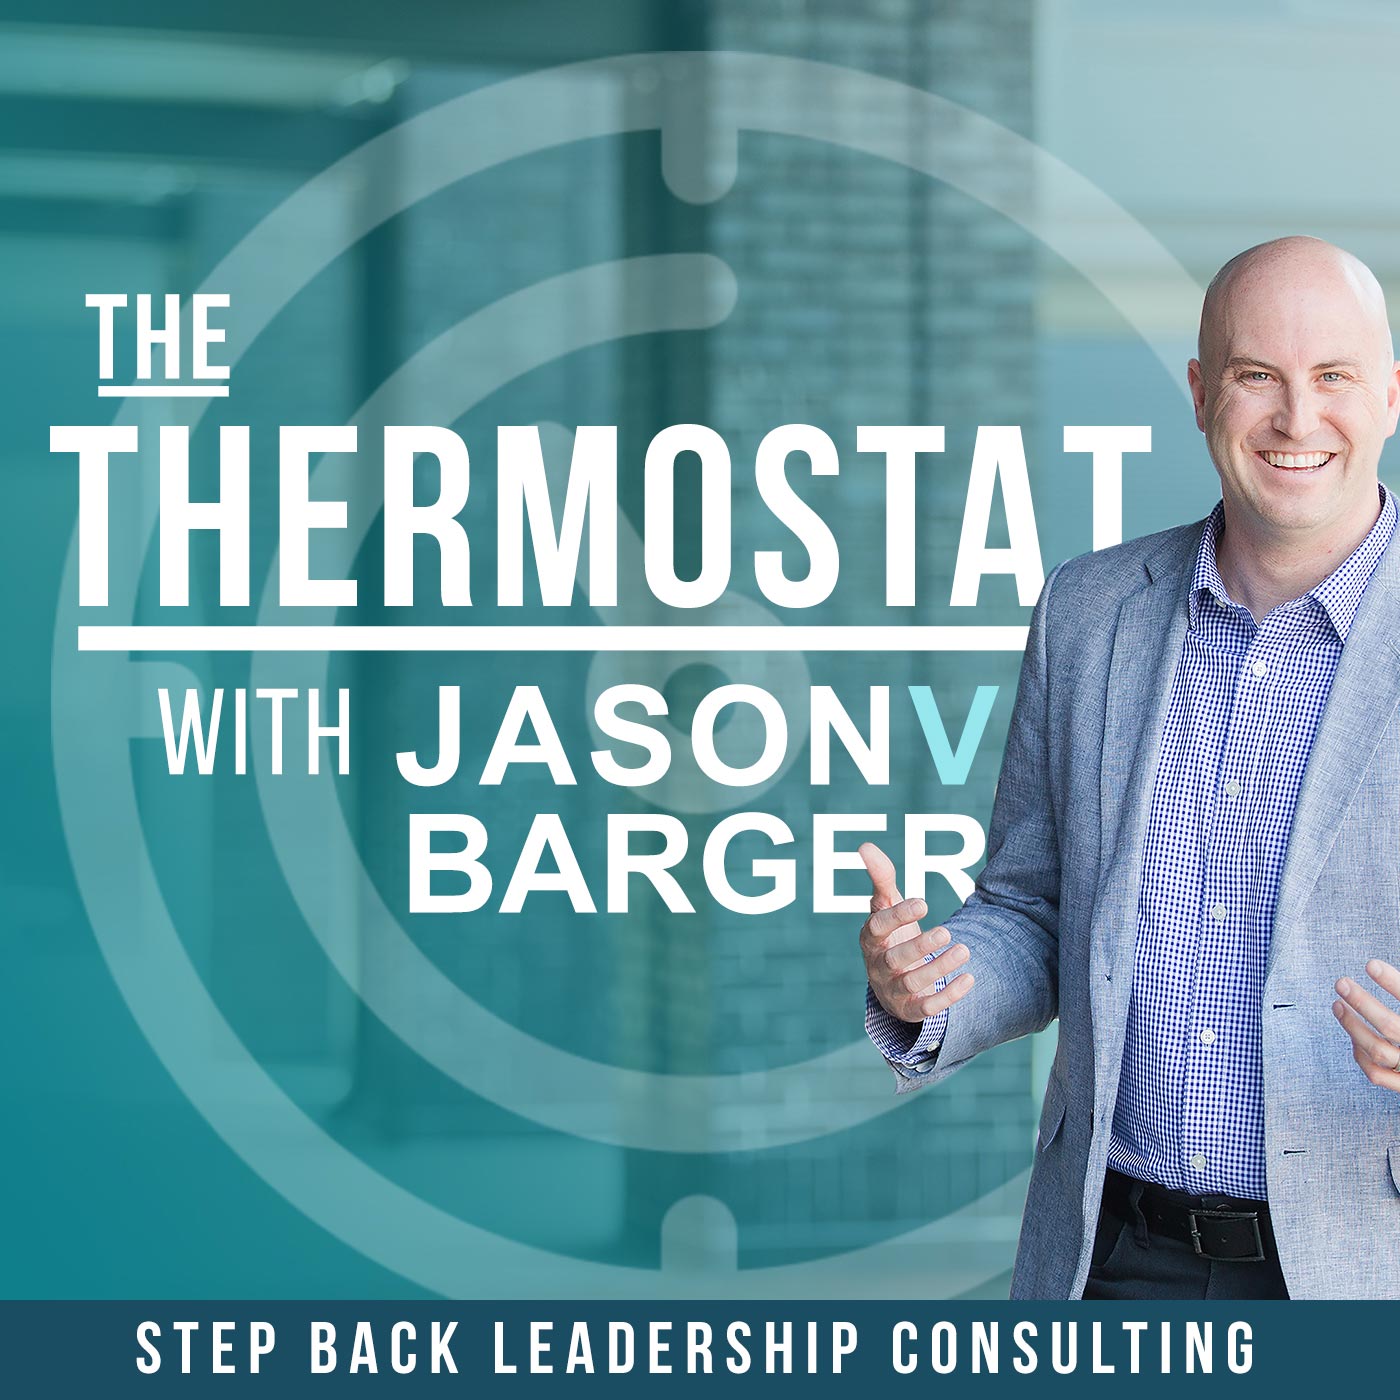 The Thermostat Podcast with Jason Barger. A workplace culture and leadership podcast going 150+ episodes strong